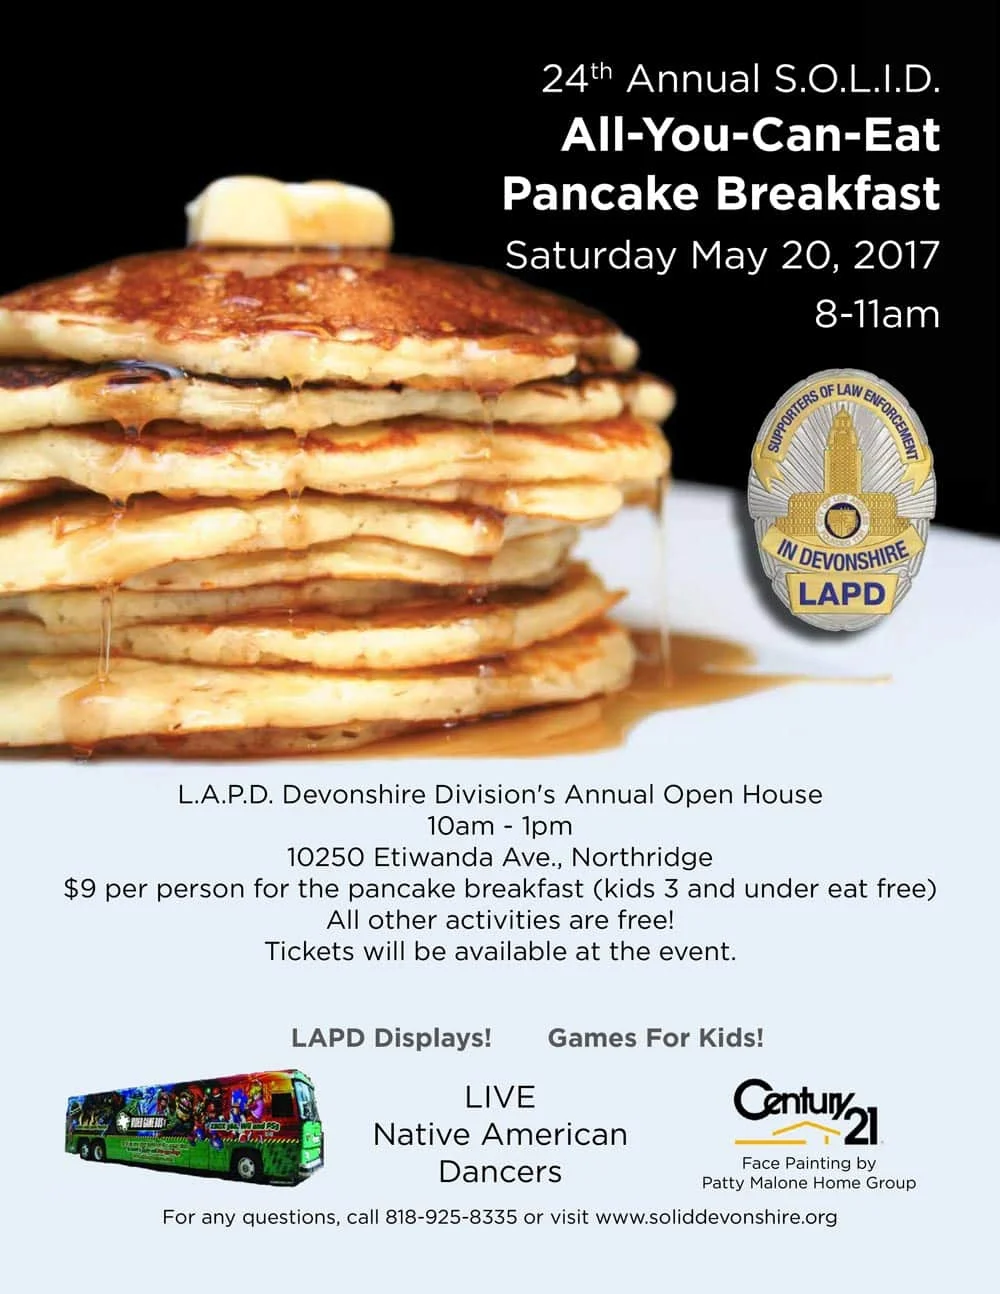 24th Annual SOLID All-You-Can-Eat Pancake Breakfast